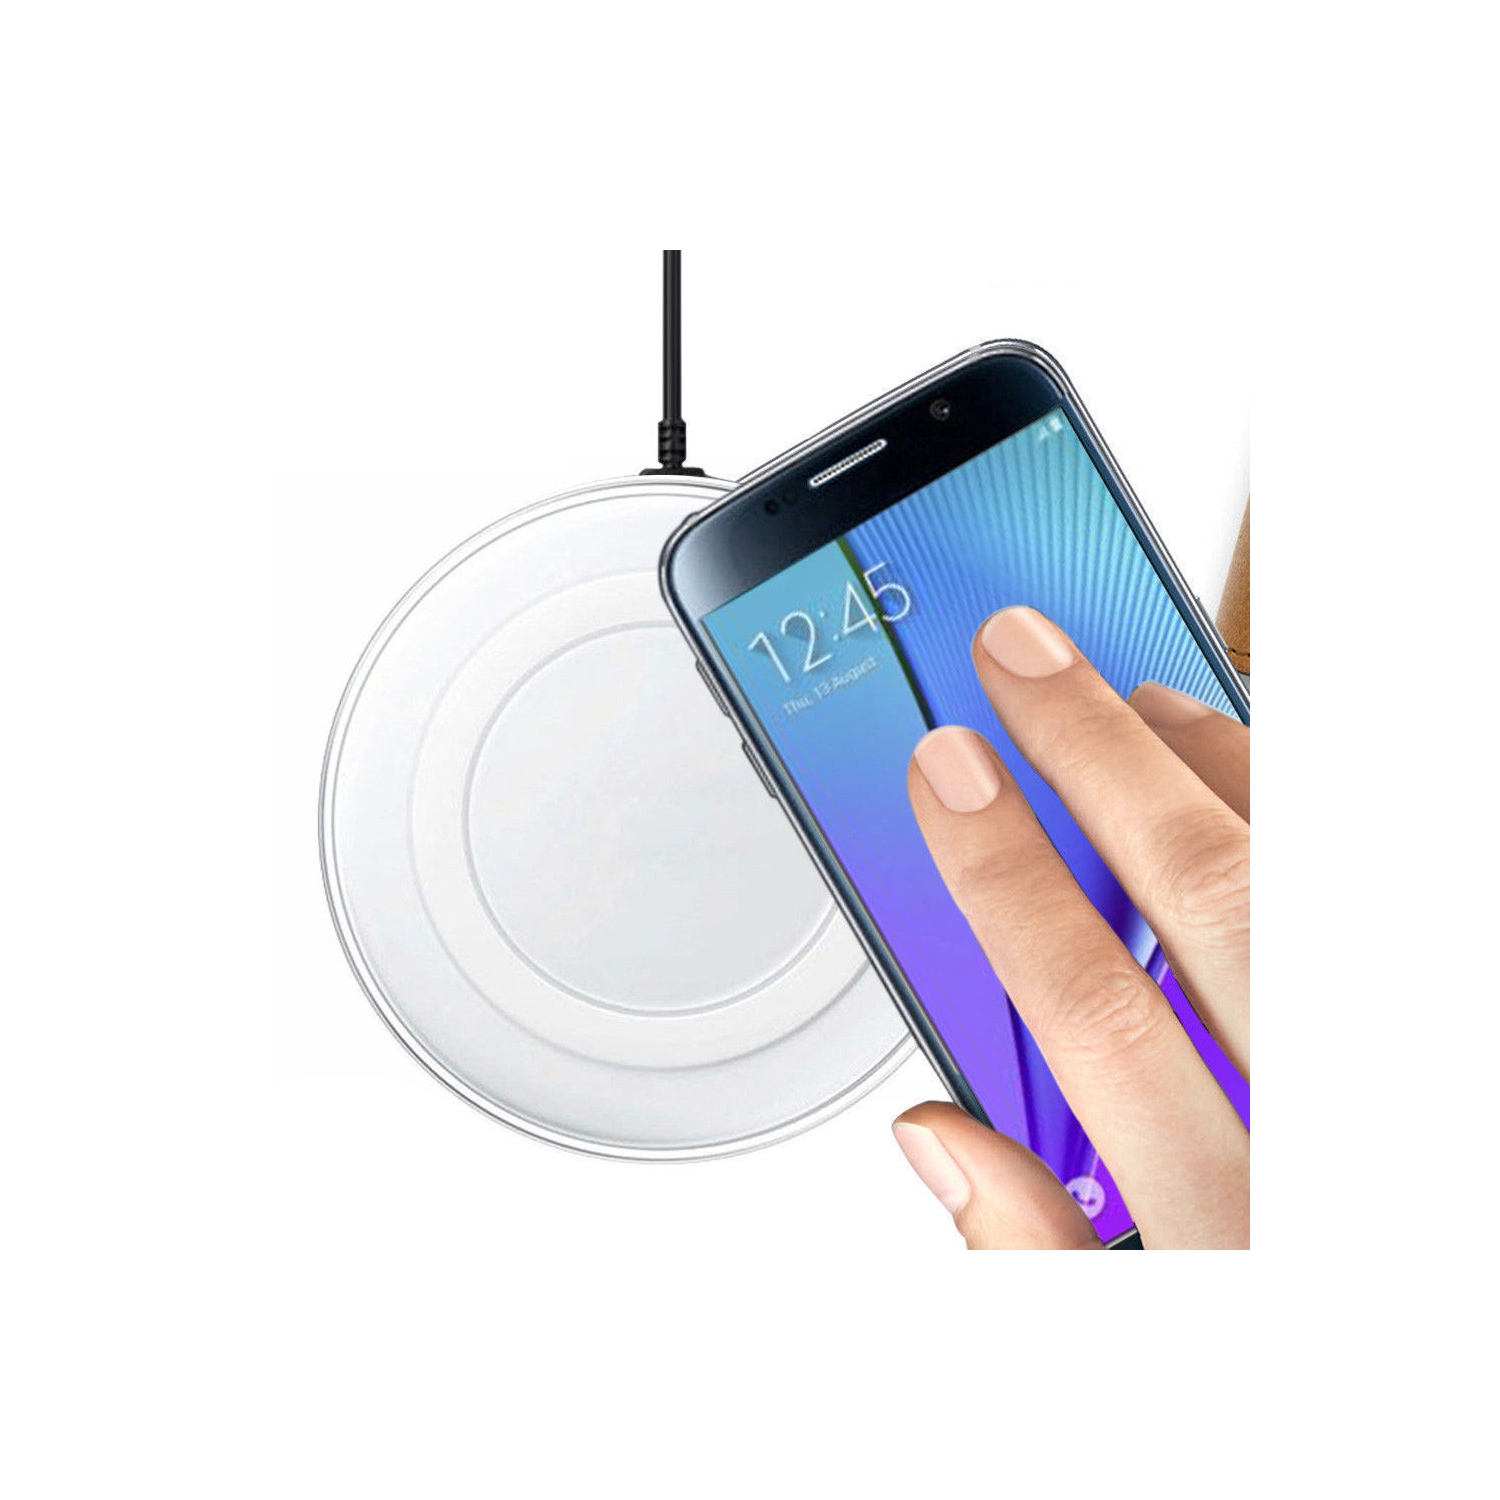 Wireless Charging Pad Qi Charger For Samsung Galaxy / iPhone / All cell phones with QI function (White)